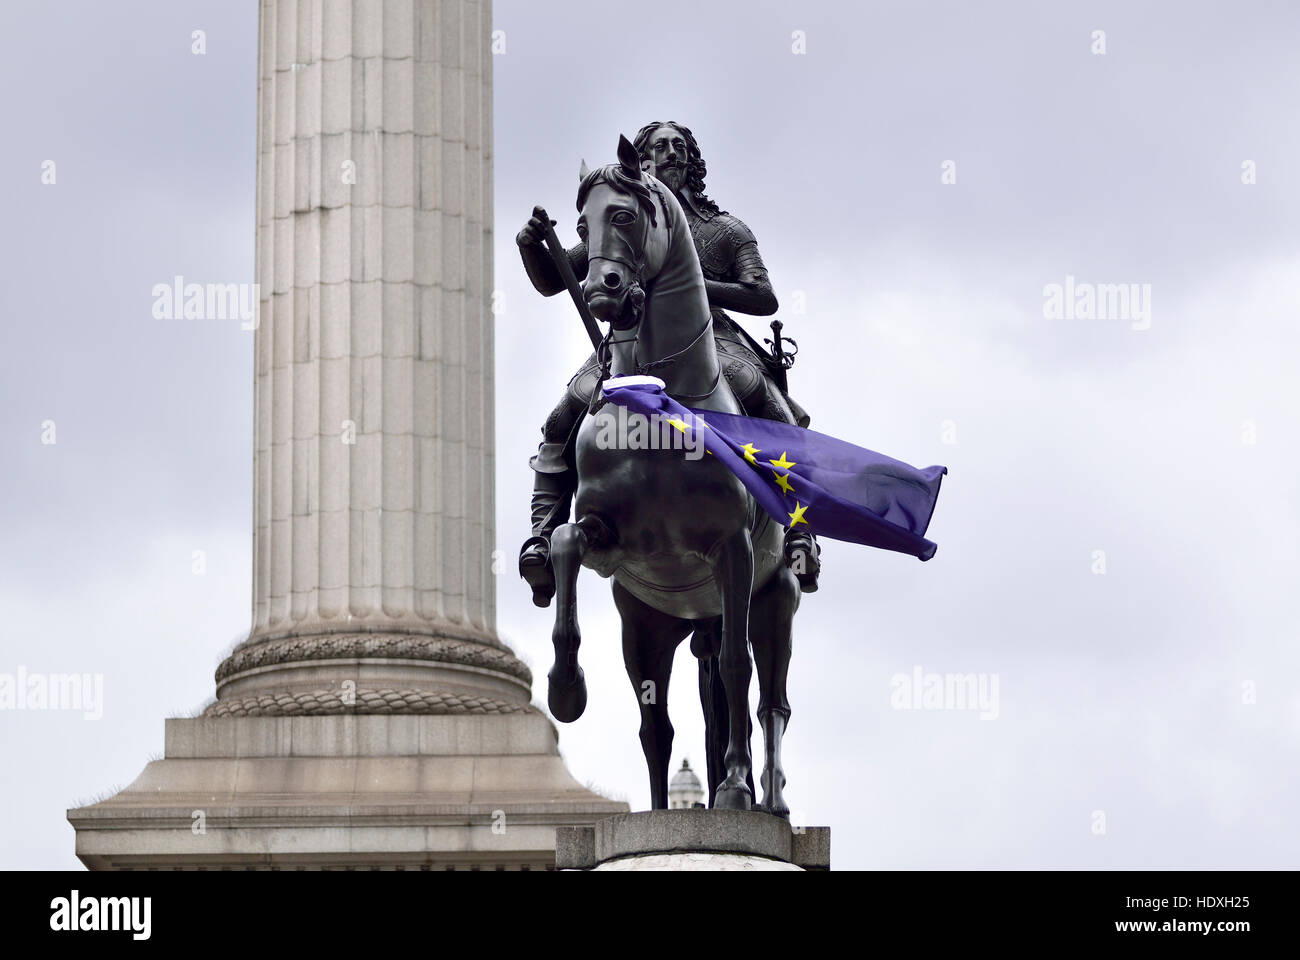 London, England, UK. Statue (1633: Hubert le Sueur) of King Charles I (1600-49) in Trafalgar Square, with EU flag. London's oldest equestrian statue.  Stock Photo